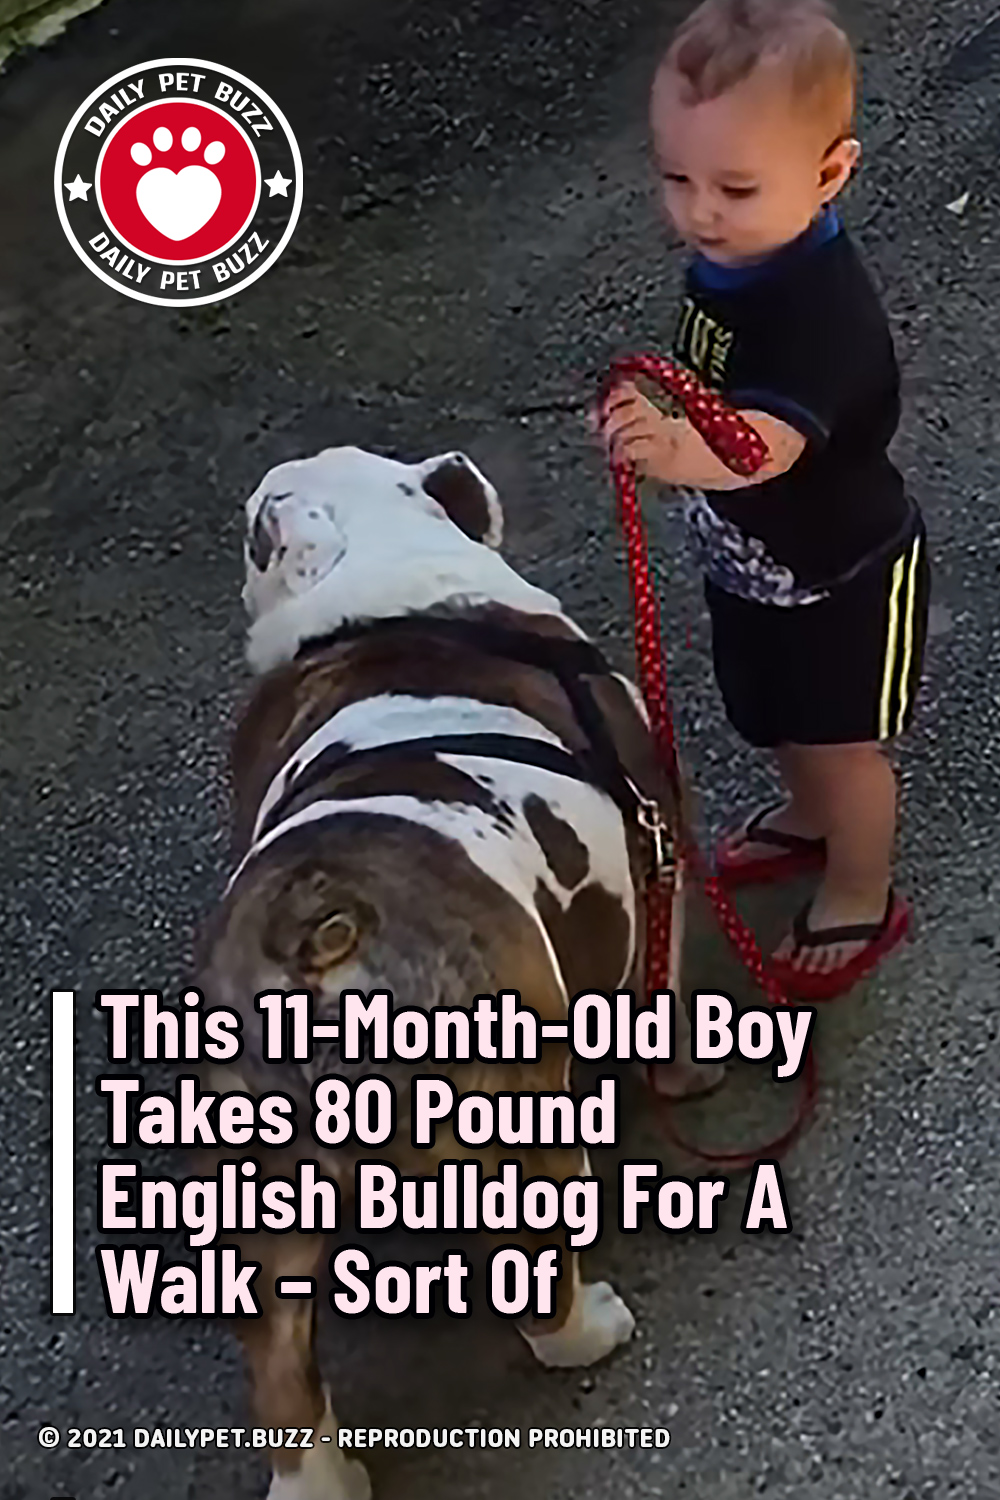 This 11-Month-Old Boy Takes 80 Pound English Bulldog For A Walk – Sort Of